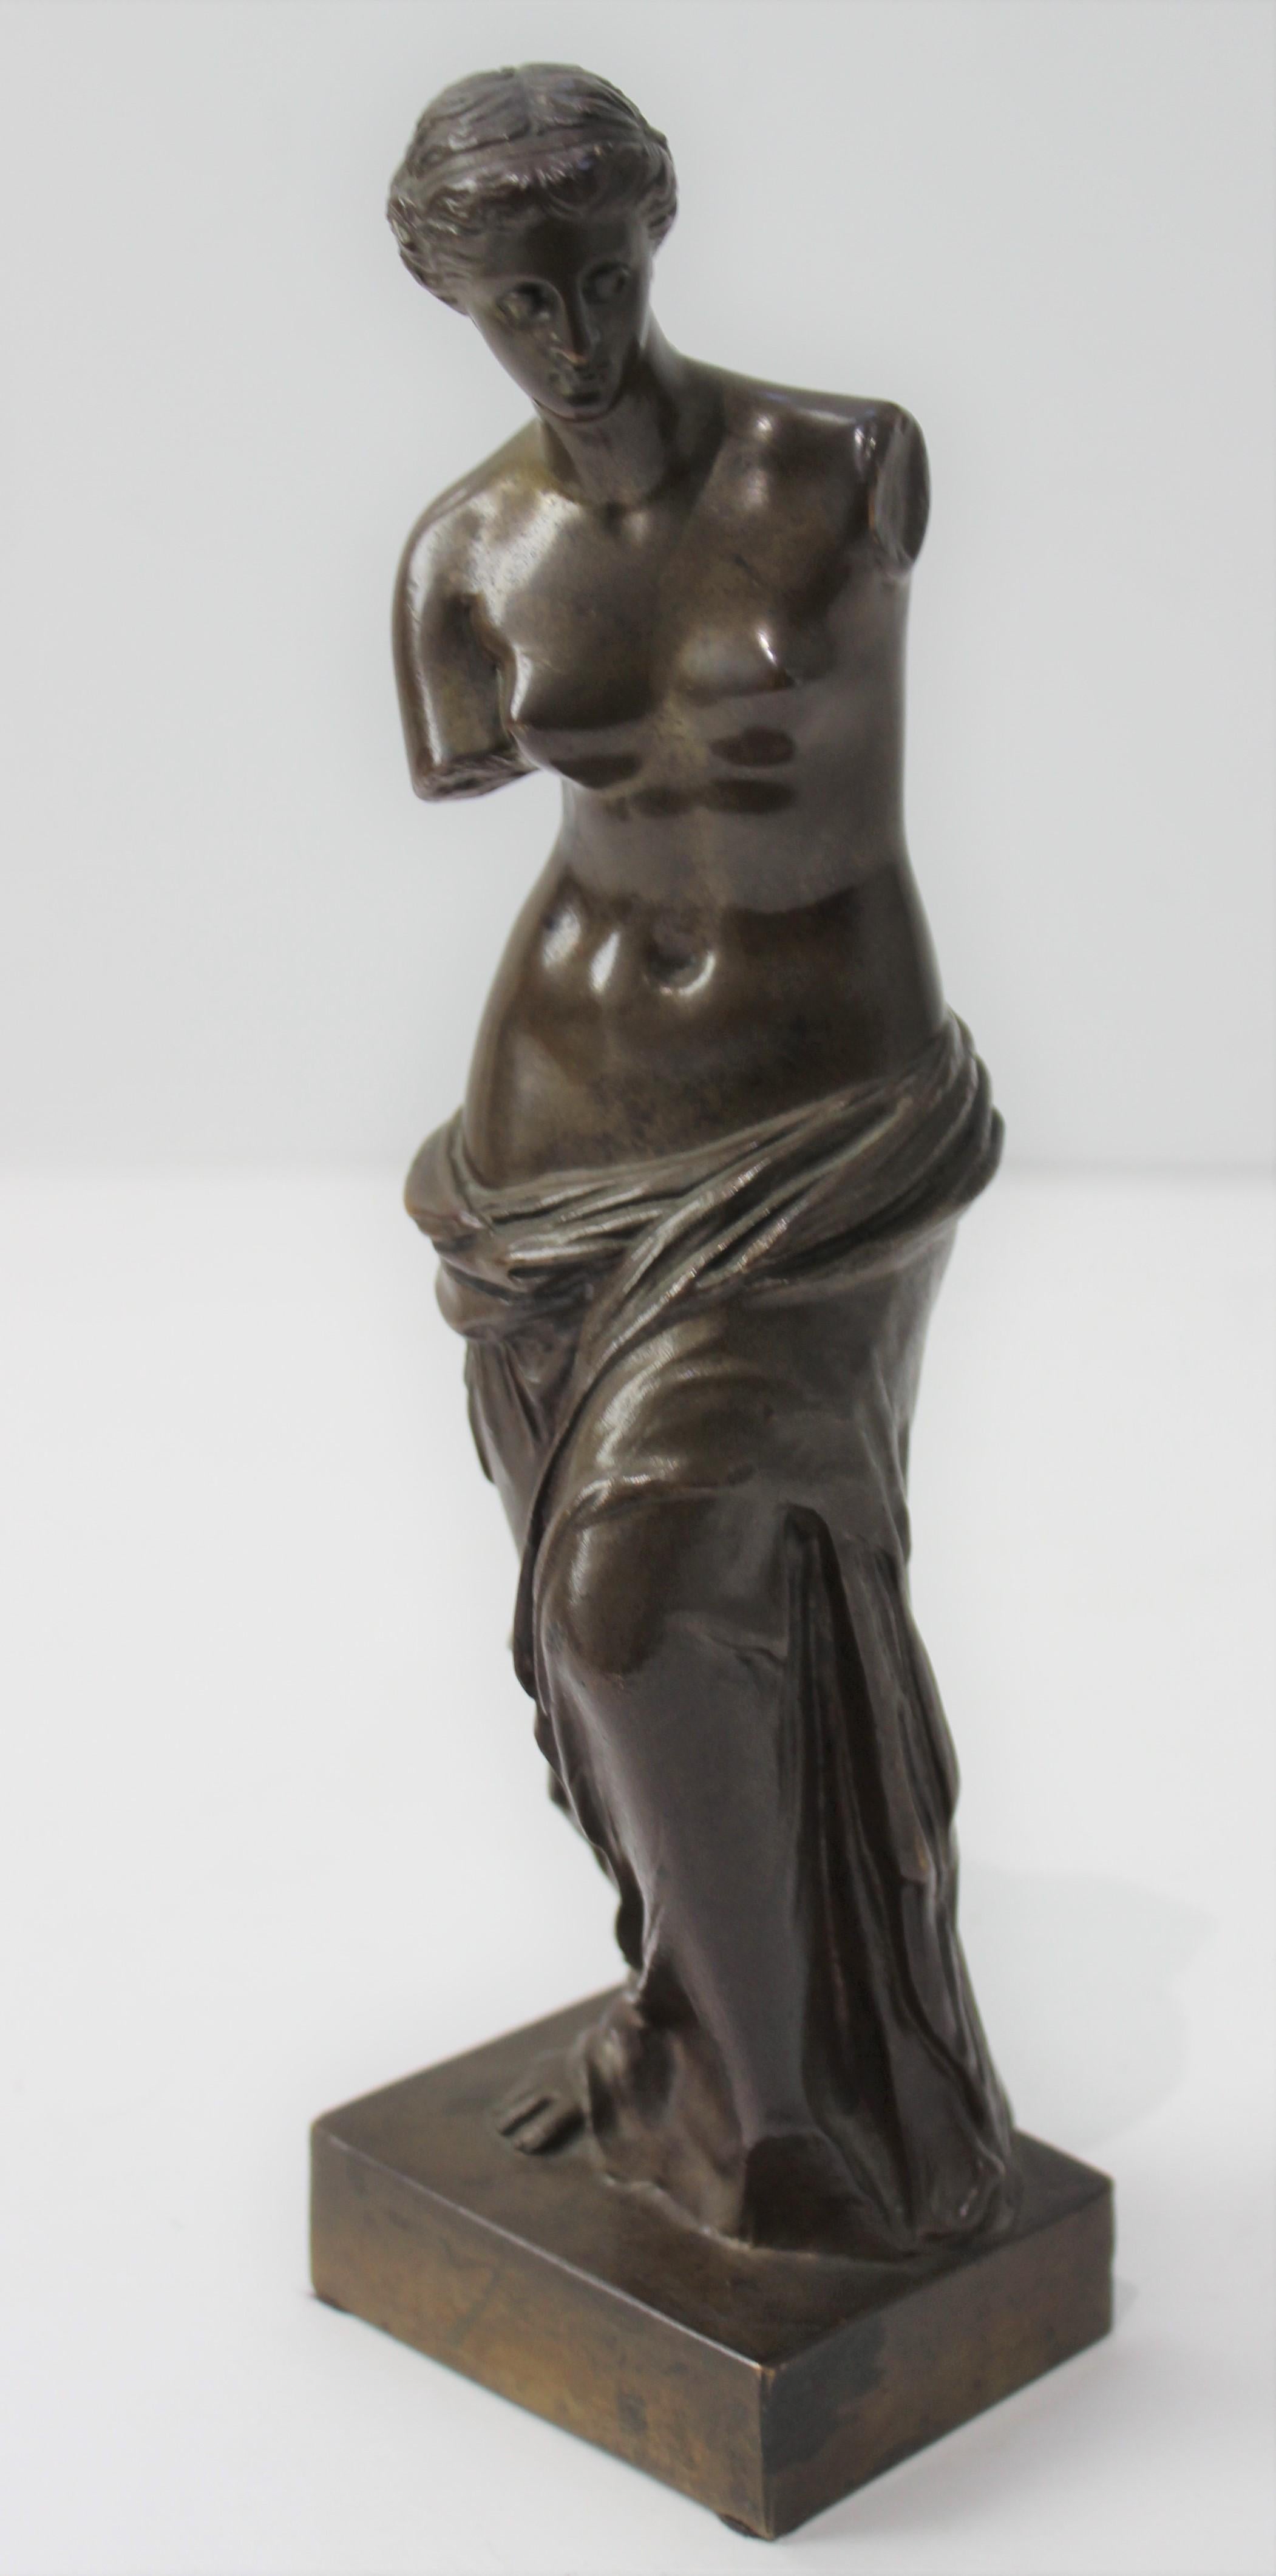 This cast bronze of the Venus de Milo dates to the late 19th century and was acquired during the 